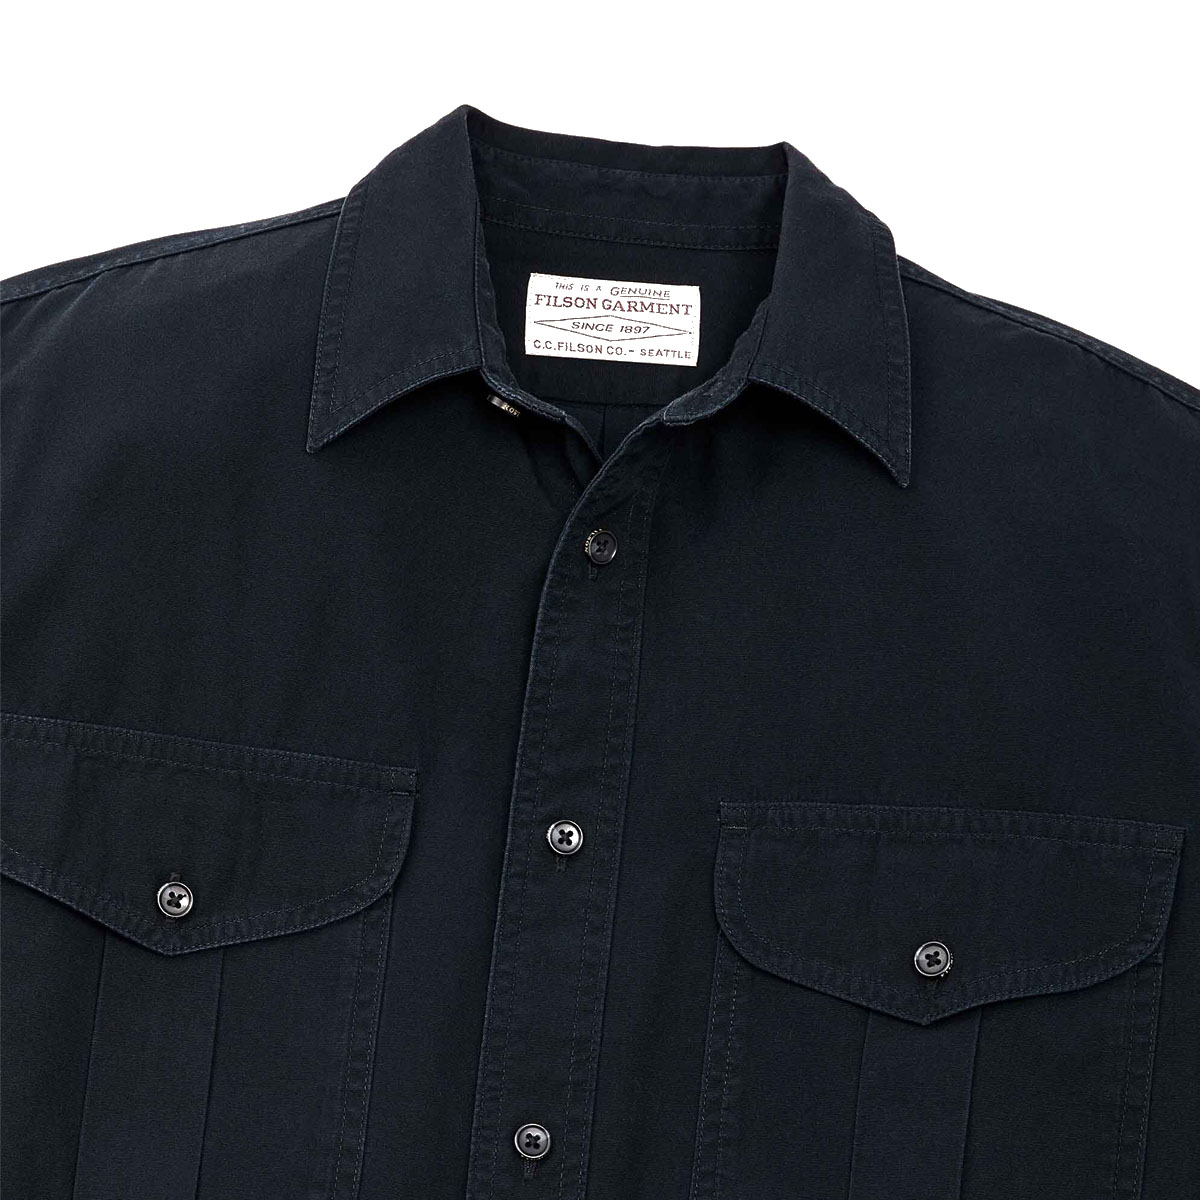 Filson Safari Cloth Guide Shirt Anthracite, hard-wearing, tightly woven shirt for work or field